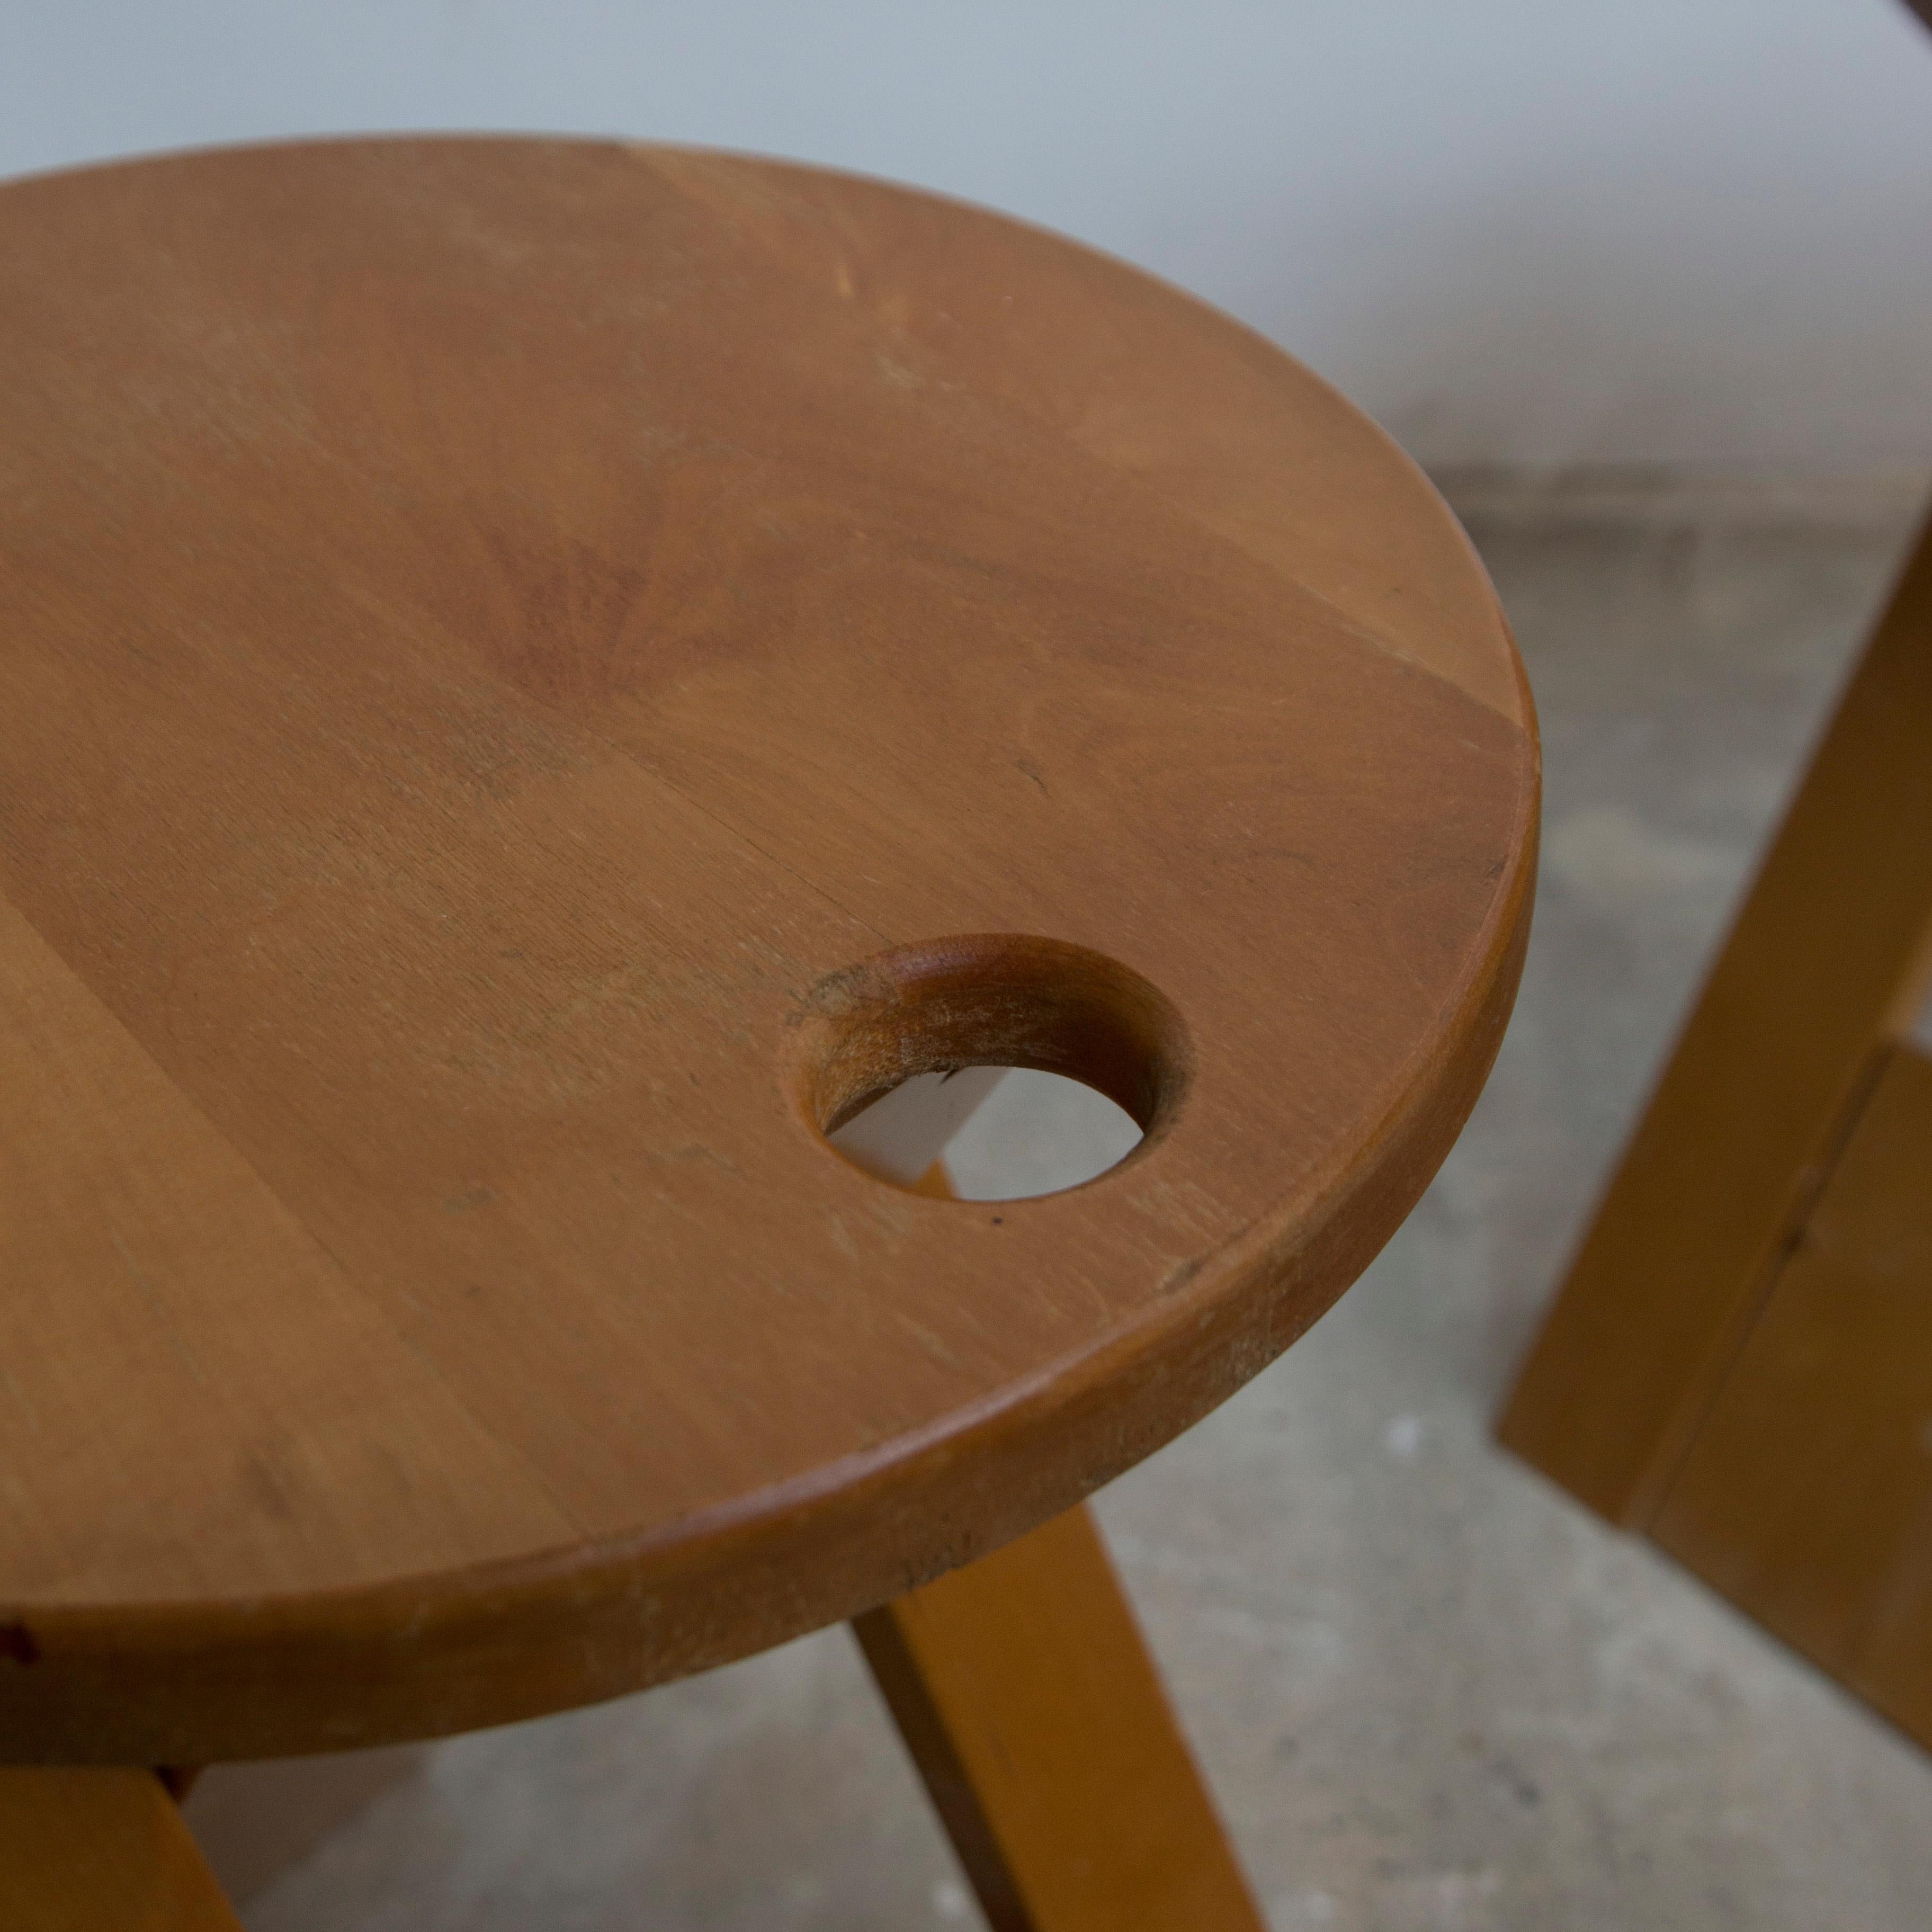 This pine stool from the 1980s has a Minimalist design. Designed by Adrian Reed for Princes Design Works Limited in London in 1984. It is foldable and has a hole allowing its suspension for optimal space saving. It is made of solid pine, foldable